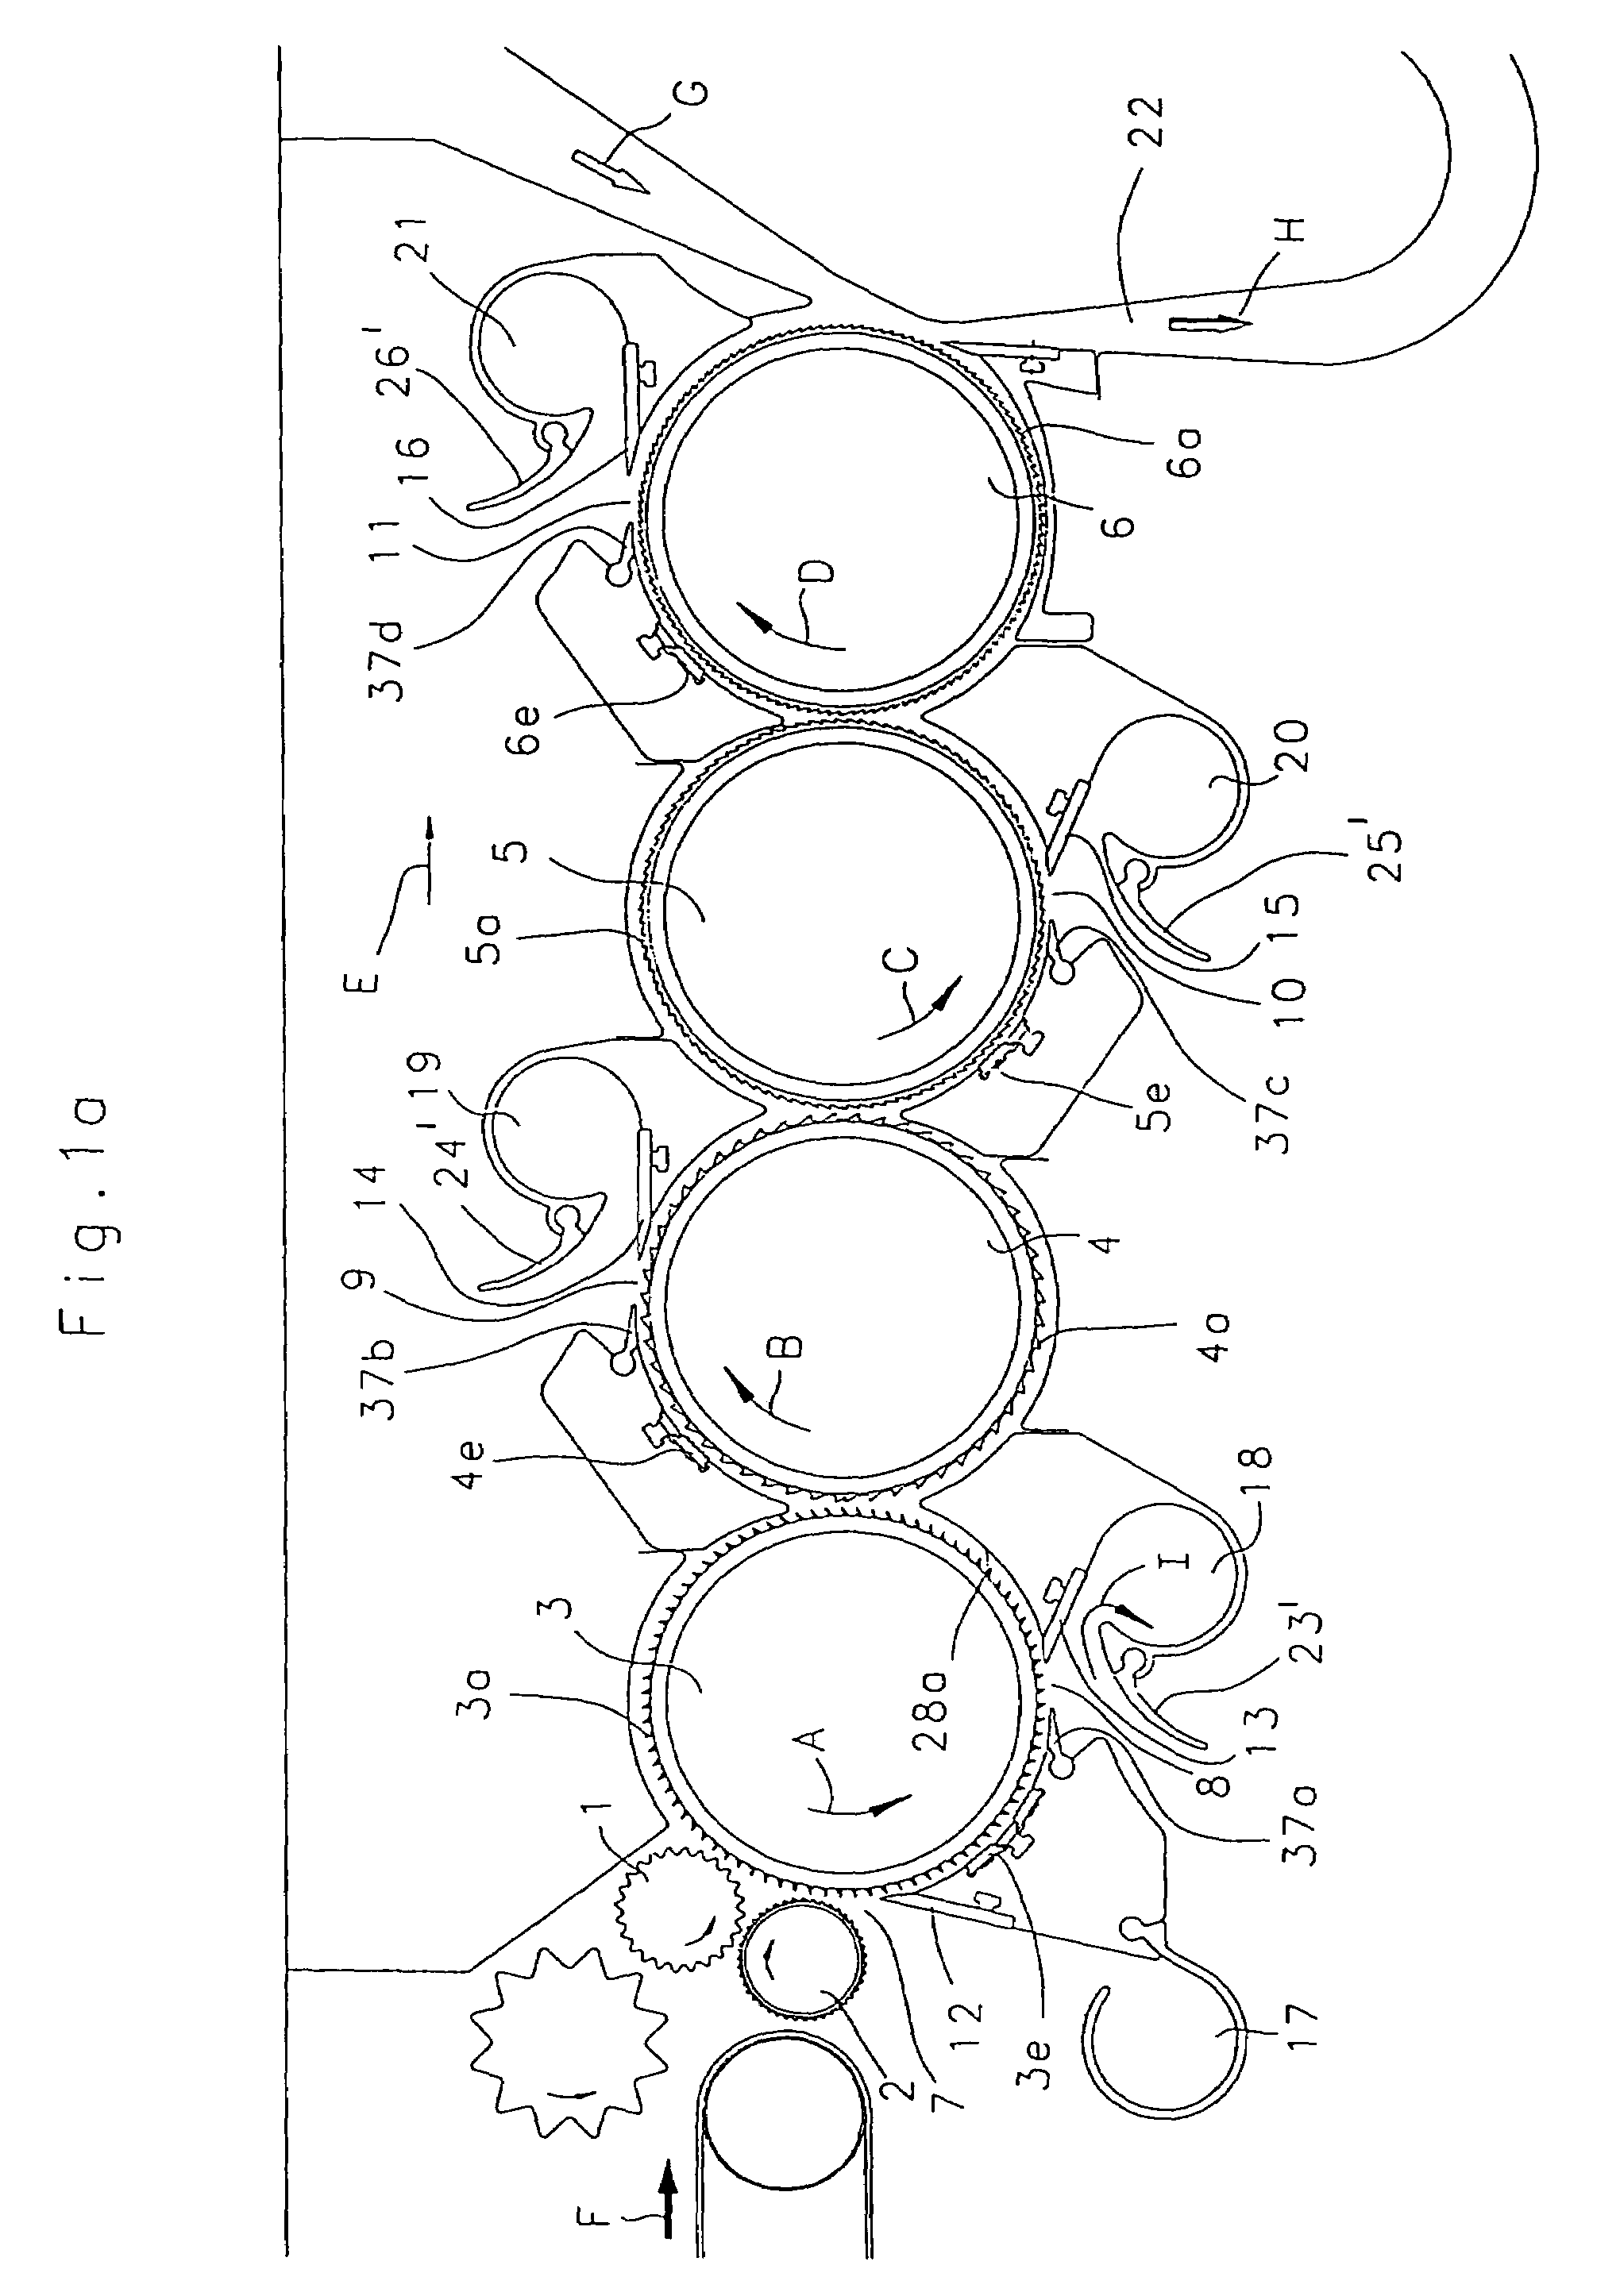 Apparatus at a spinning preparation machine for detecting waste separated out from fibre material